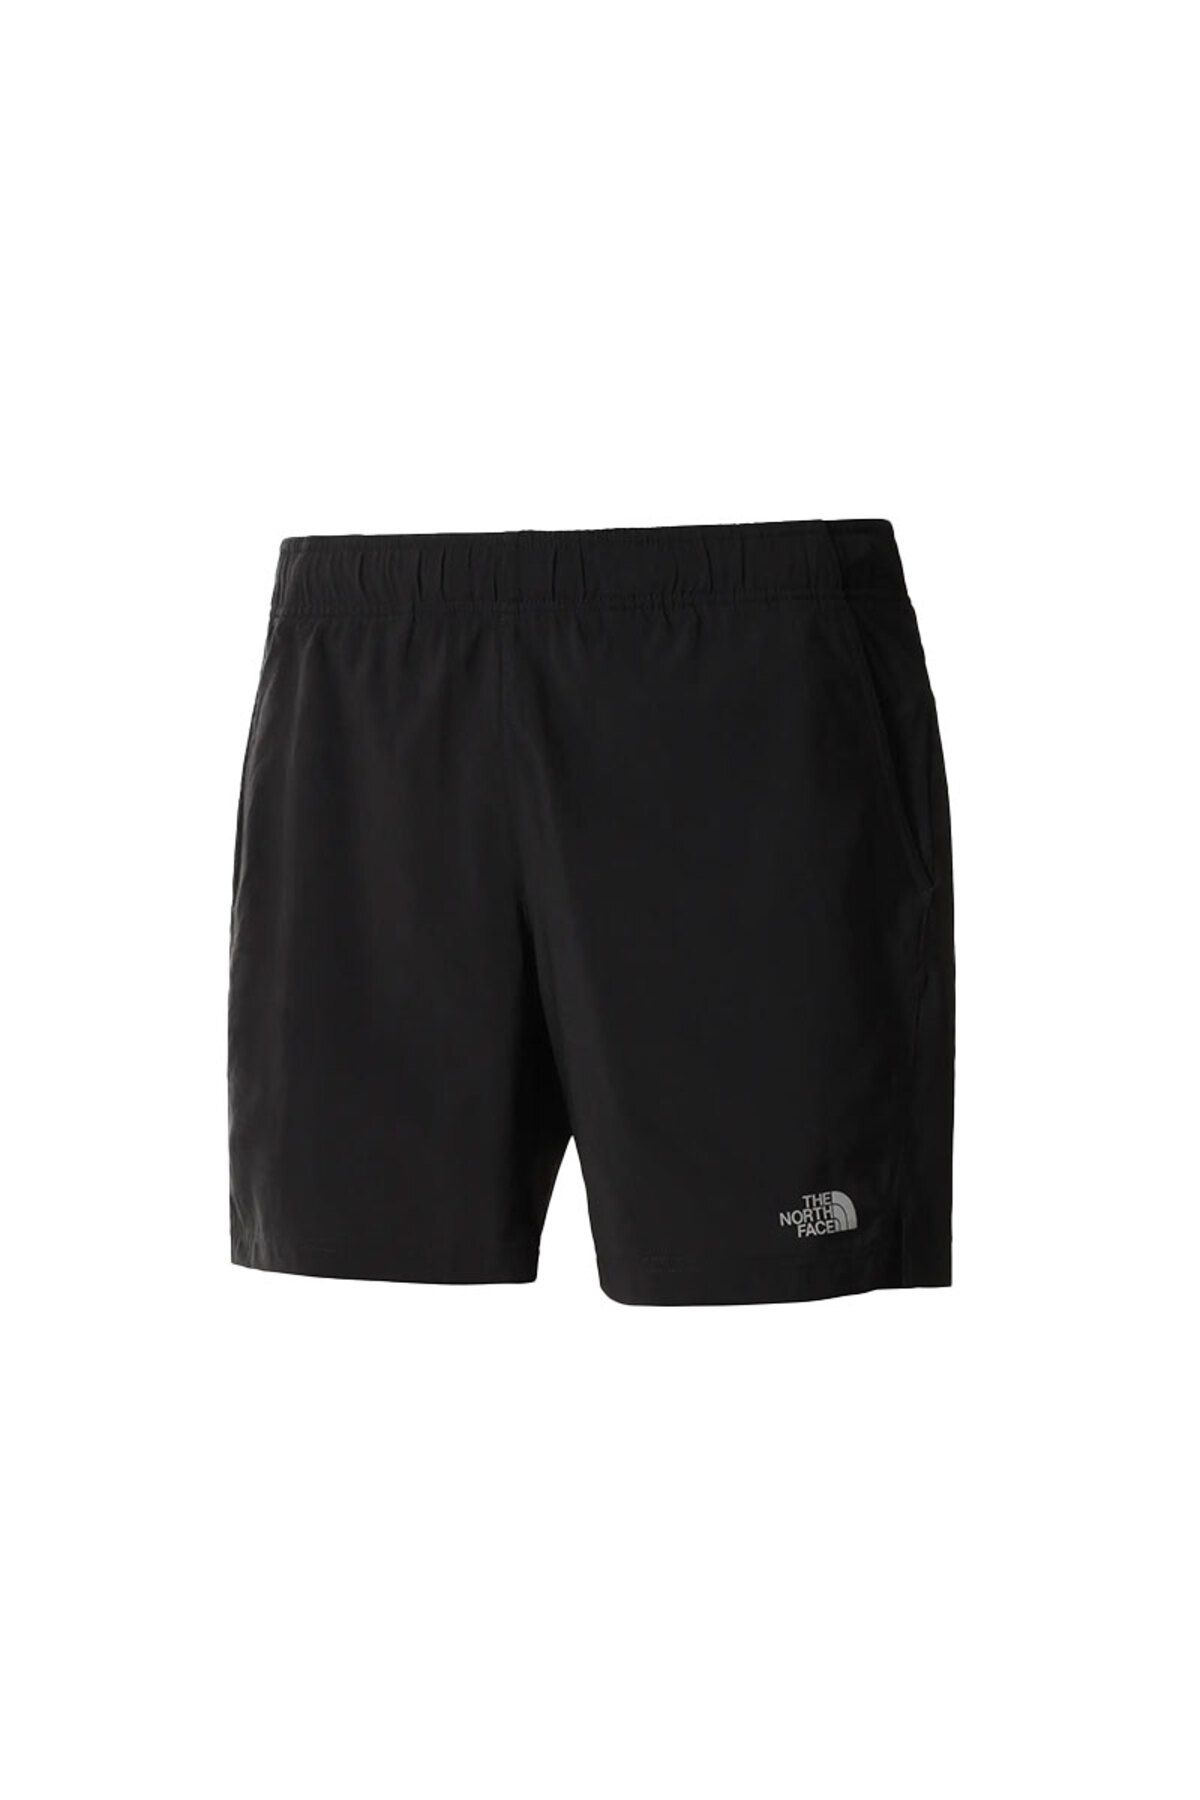 The North Face M 24/7 7ın Short